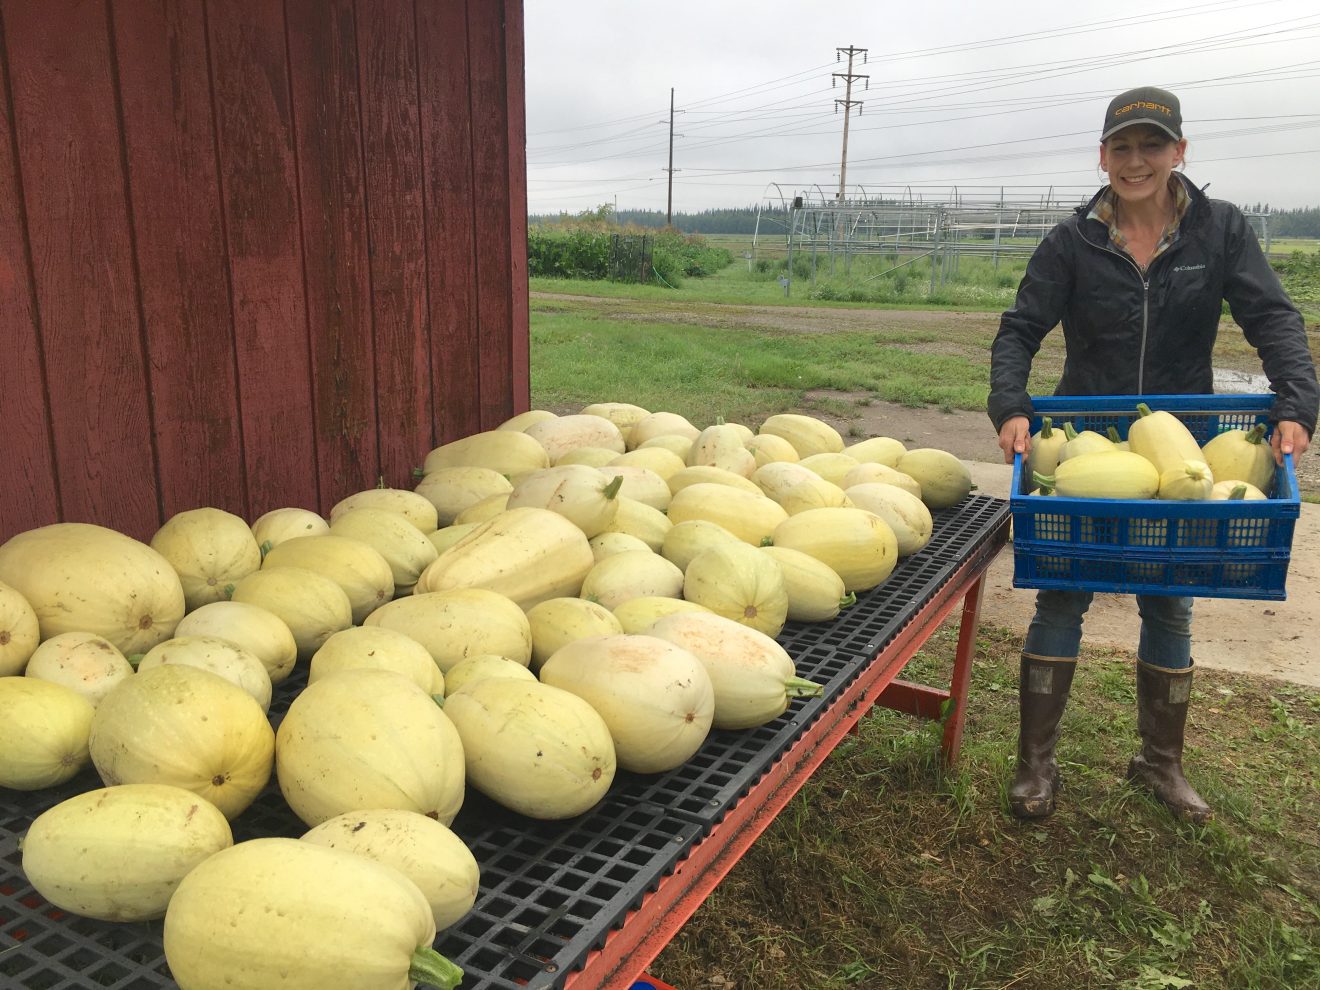 A woman holds a crate full of spaghetti squash and stands next to a long table filled with more spaghetti squash.